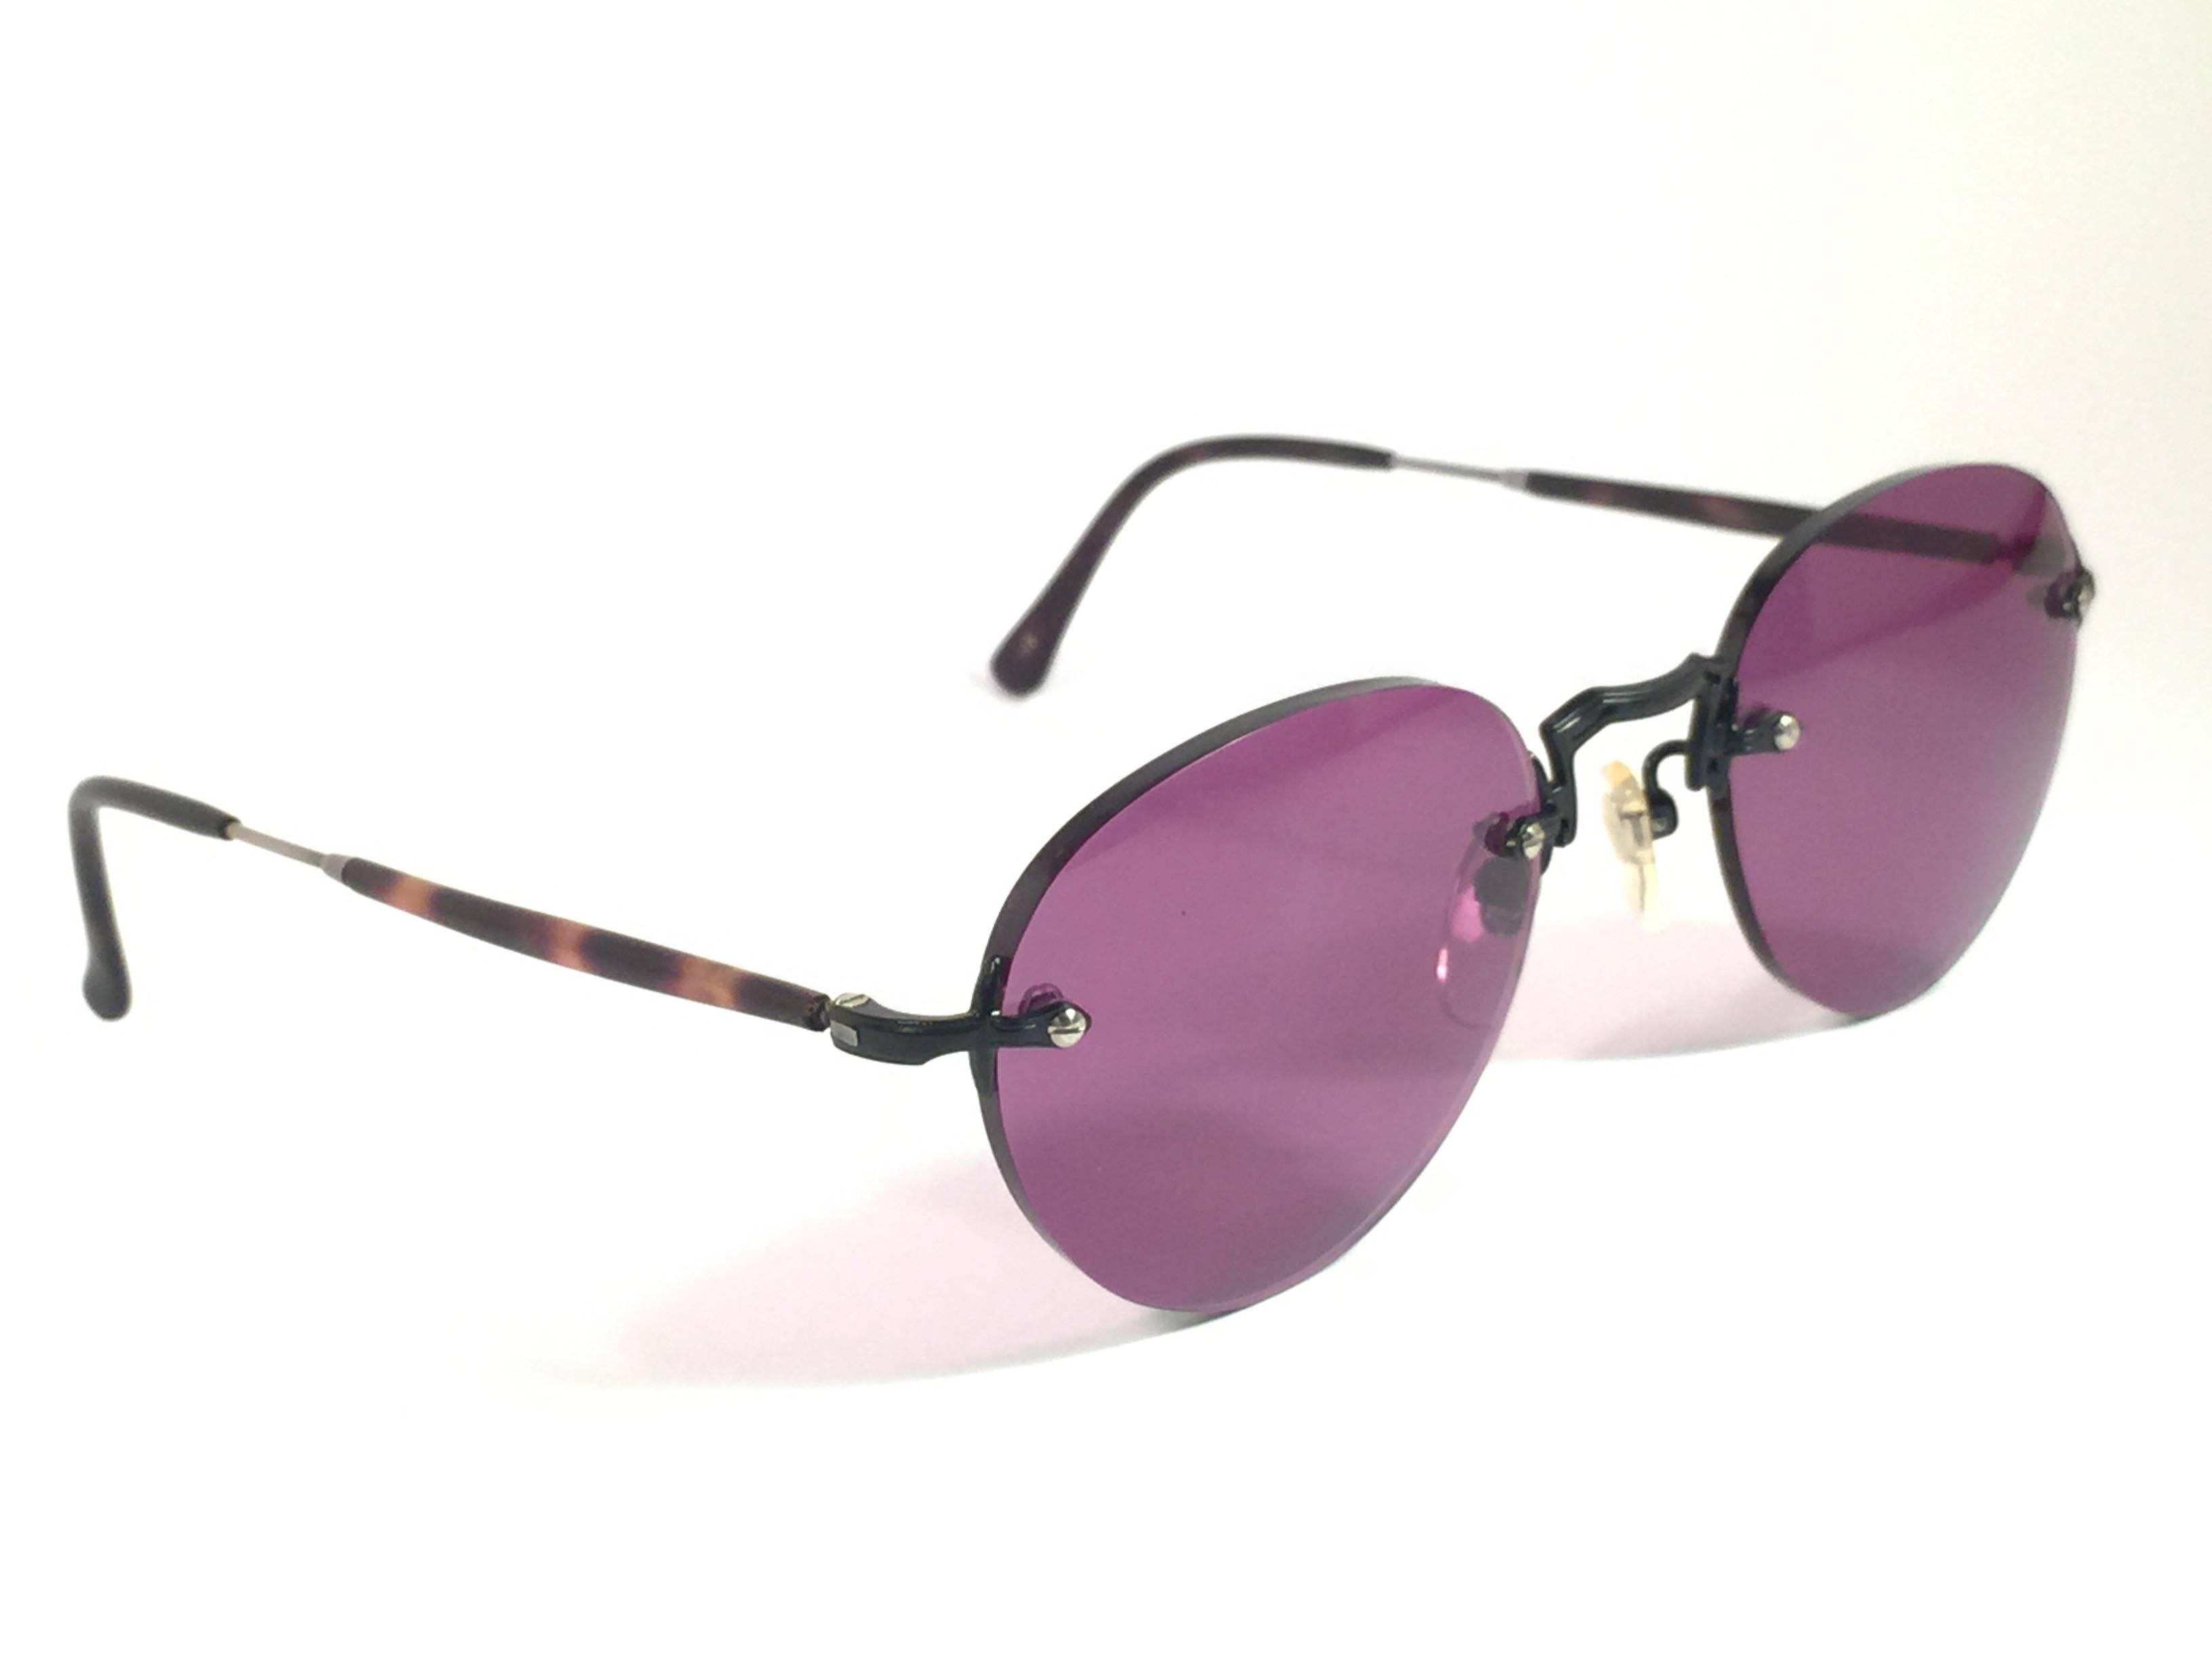 Cult brand Matsuda signed this ultra chic pair of black oval rimless with tortoise temples sunglasses. 

Spotless dark purple lenses.

Superior quality and design. 

New, never worn or displayed. Made in japan.
